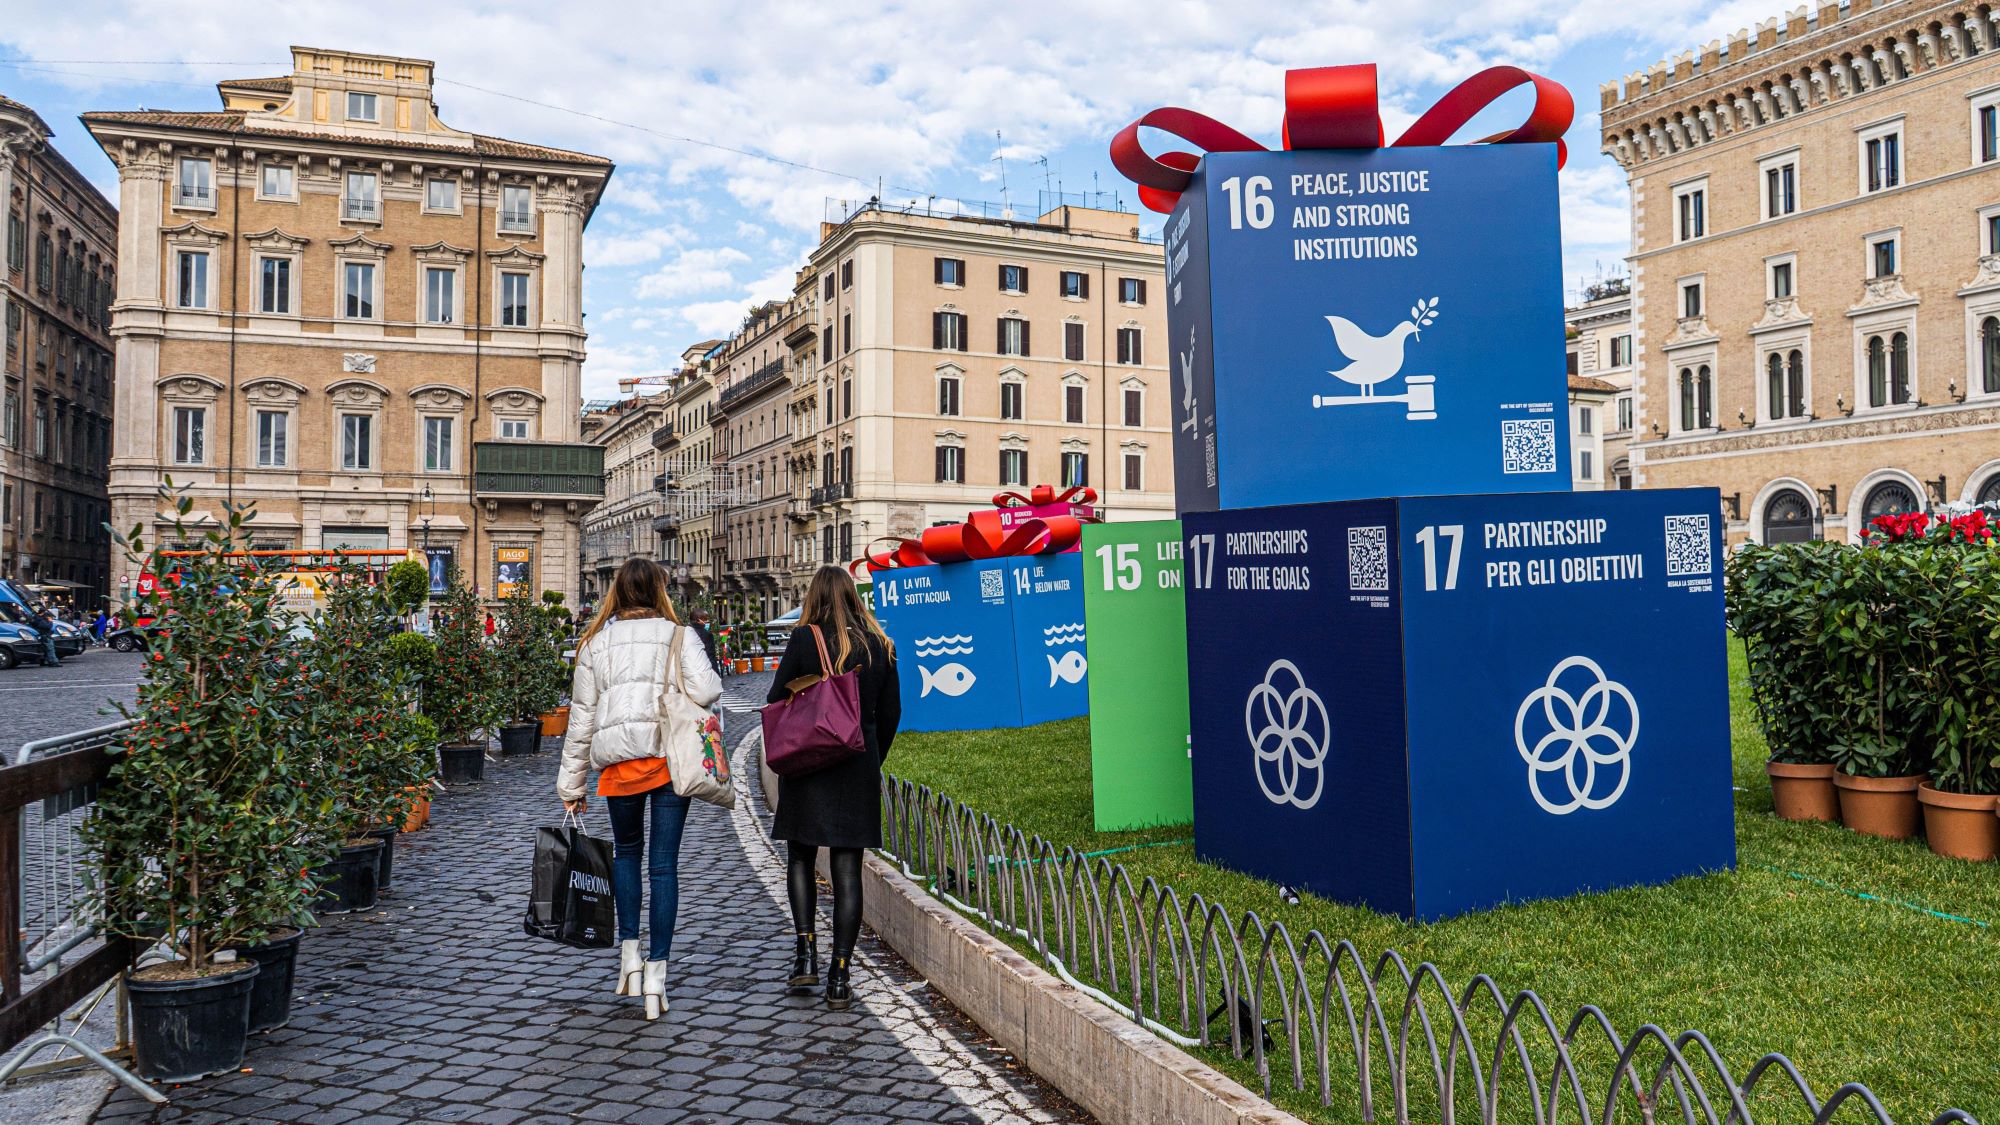 © Alamy Stock Photo, Image: Amer Ghazzal Two people are walking across a town square that is decorated with big boxes representing the UN's Sustainable Development Goals. Readable are boxes with goal 16 Peace, Justice and strong institutions and goal 17 Partnerships for the goals.